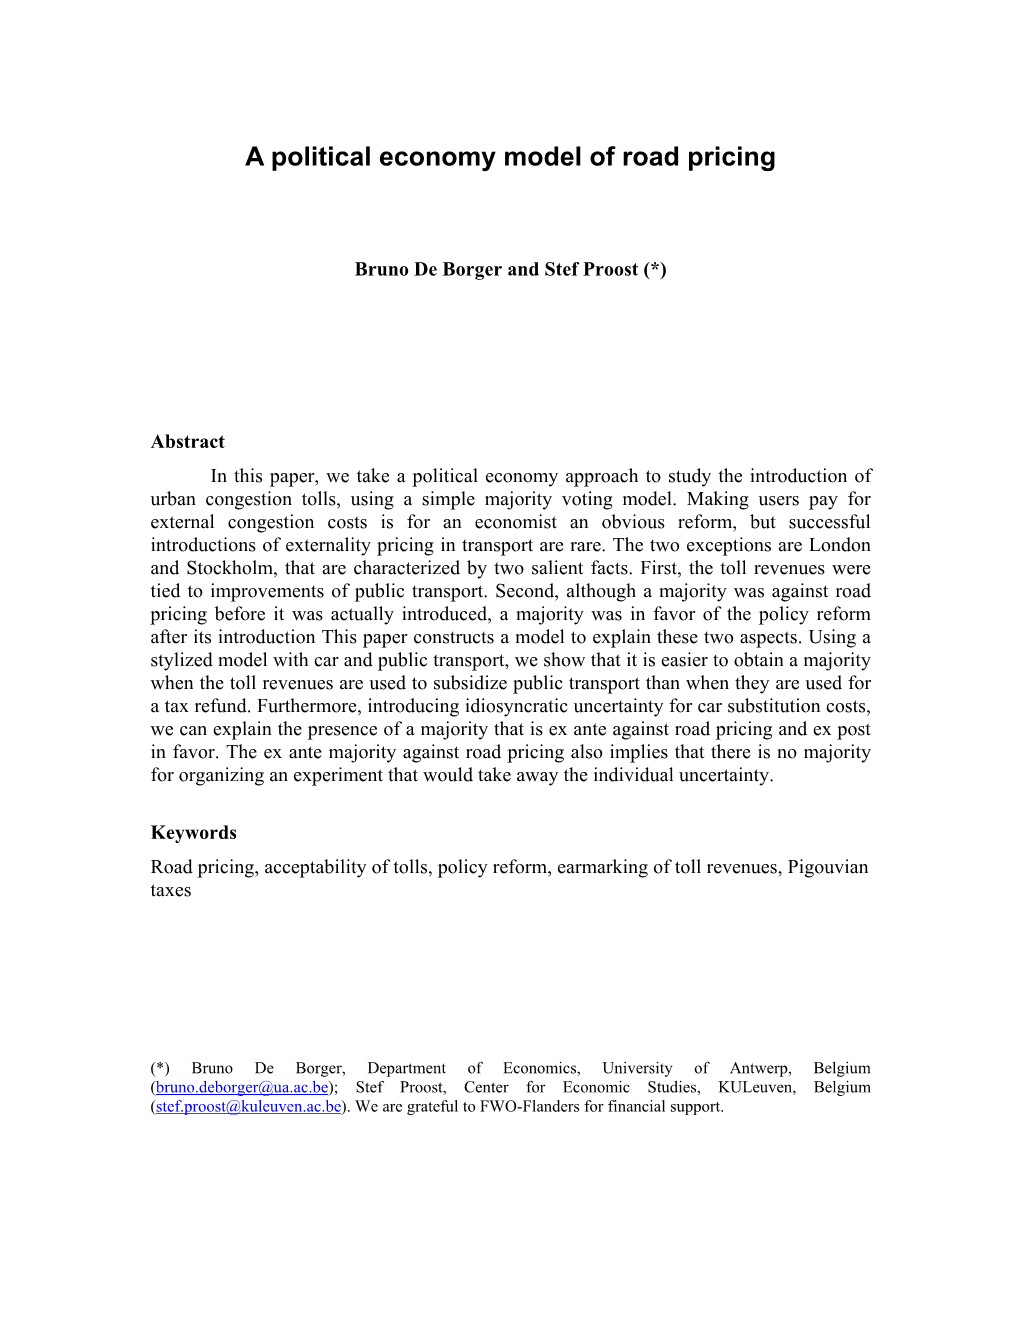 A Political Economy Model of Road Pricing